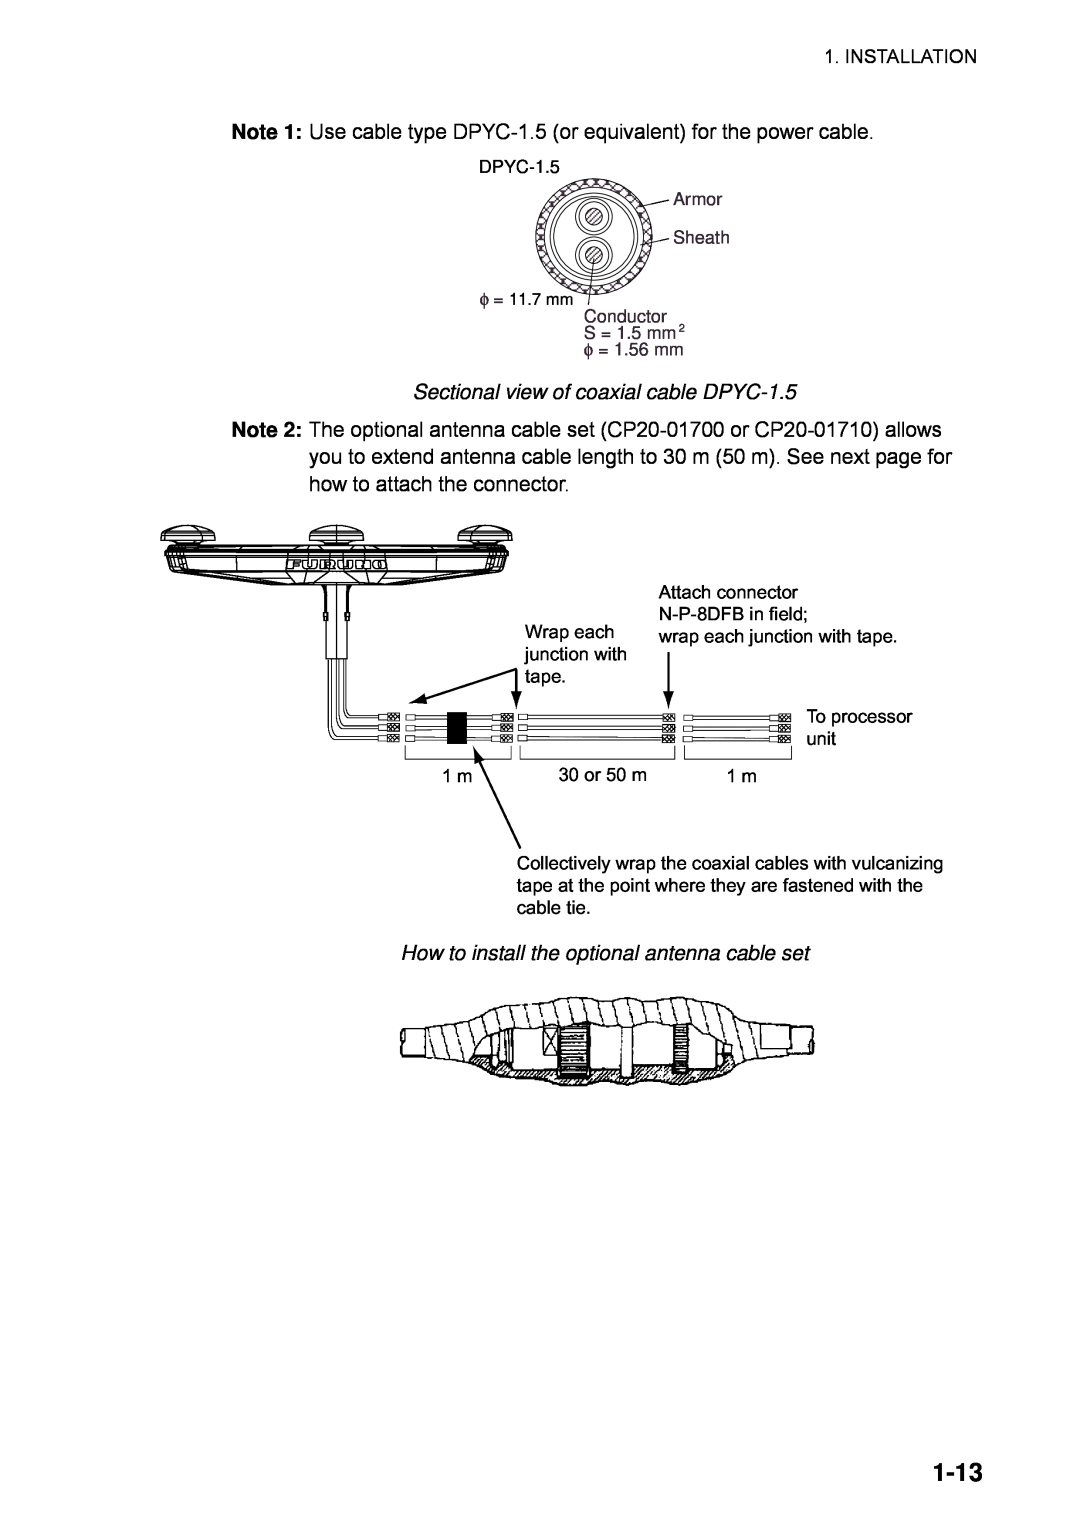 Furuno SC-110 manual 1-13, Sectional view of coaxial cable DPYC-1.5, How to install the optional antenna cable set 